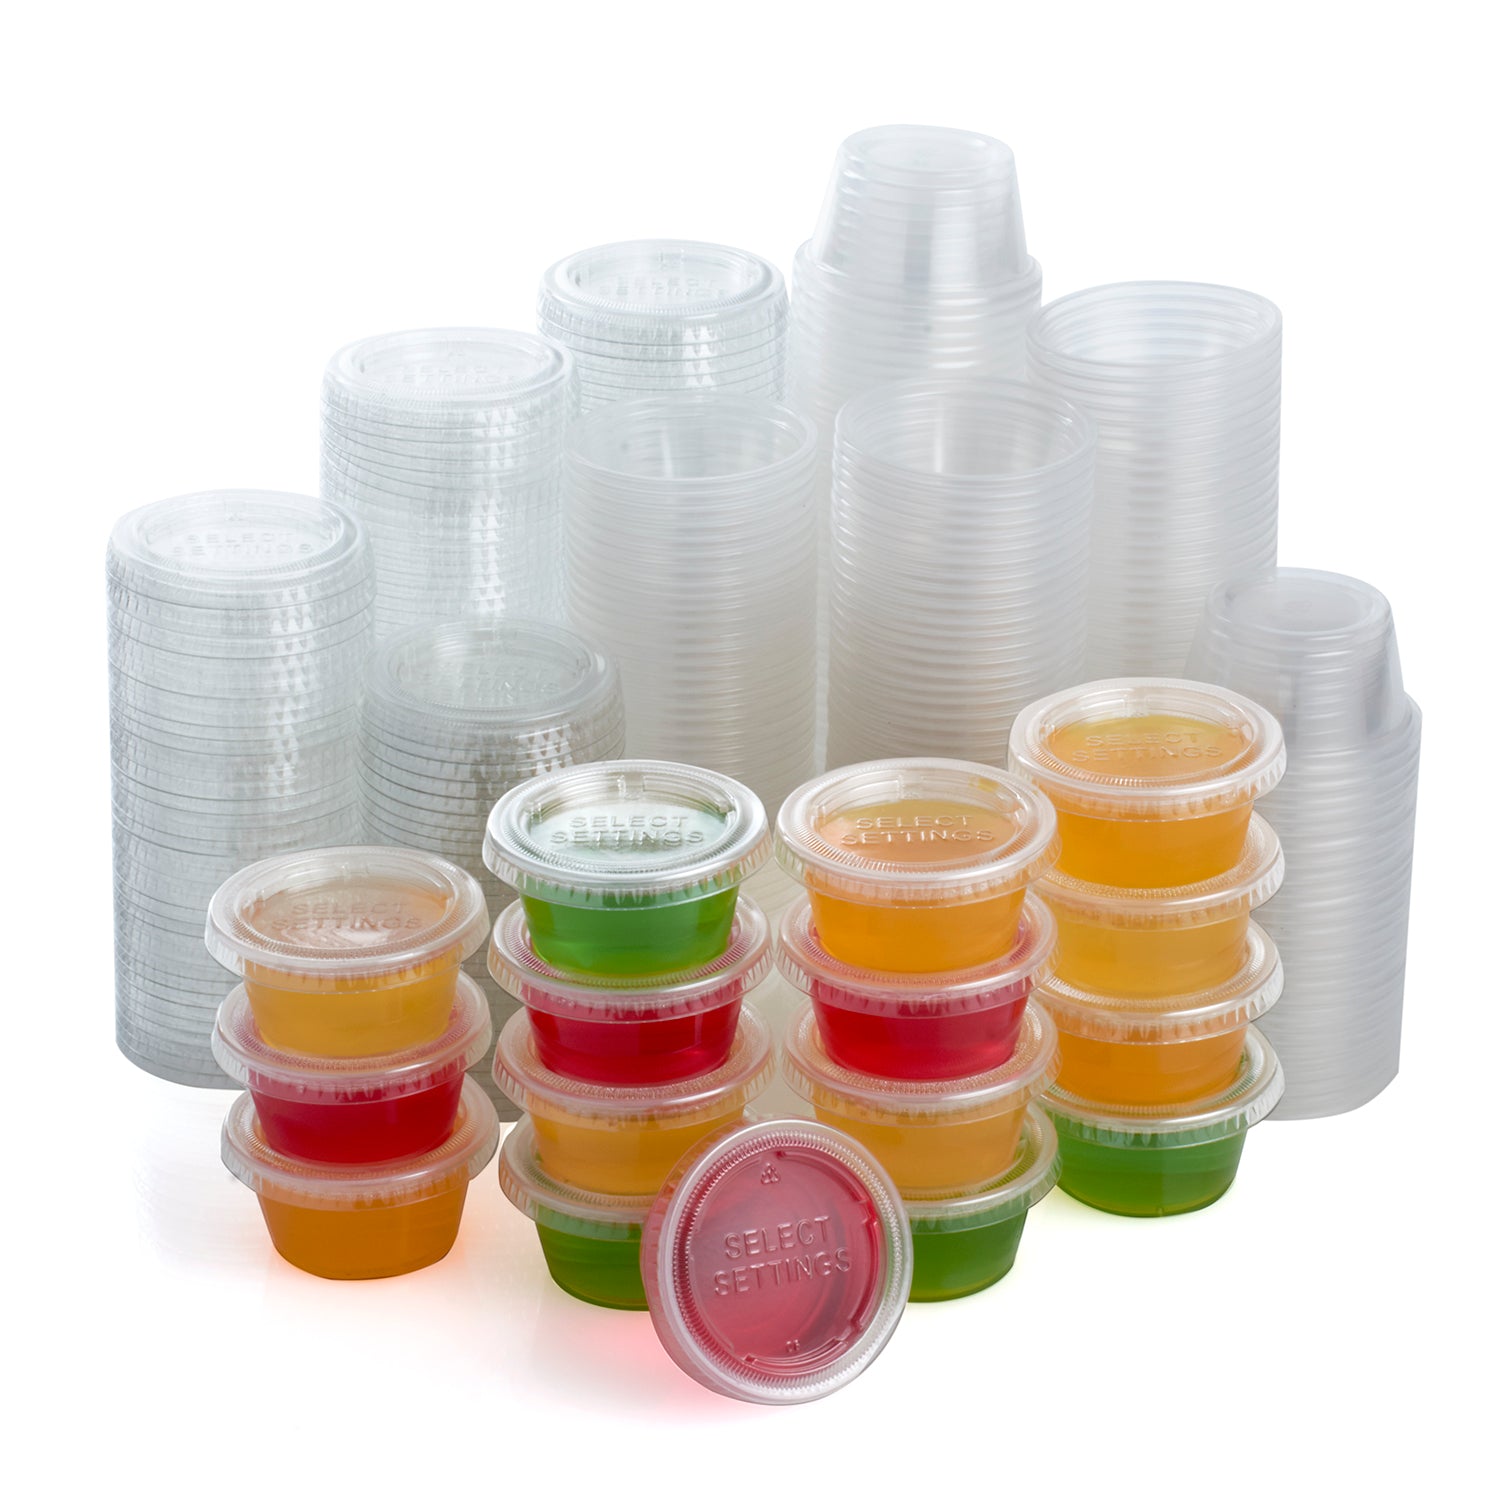 Clear Plastic Cups - Pack of 200 Bulk, 3 oz Disposable Drink Cups